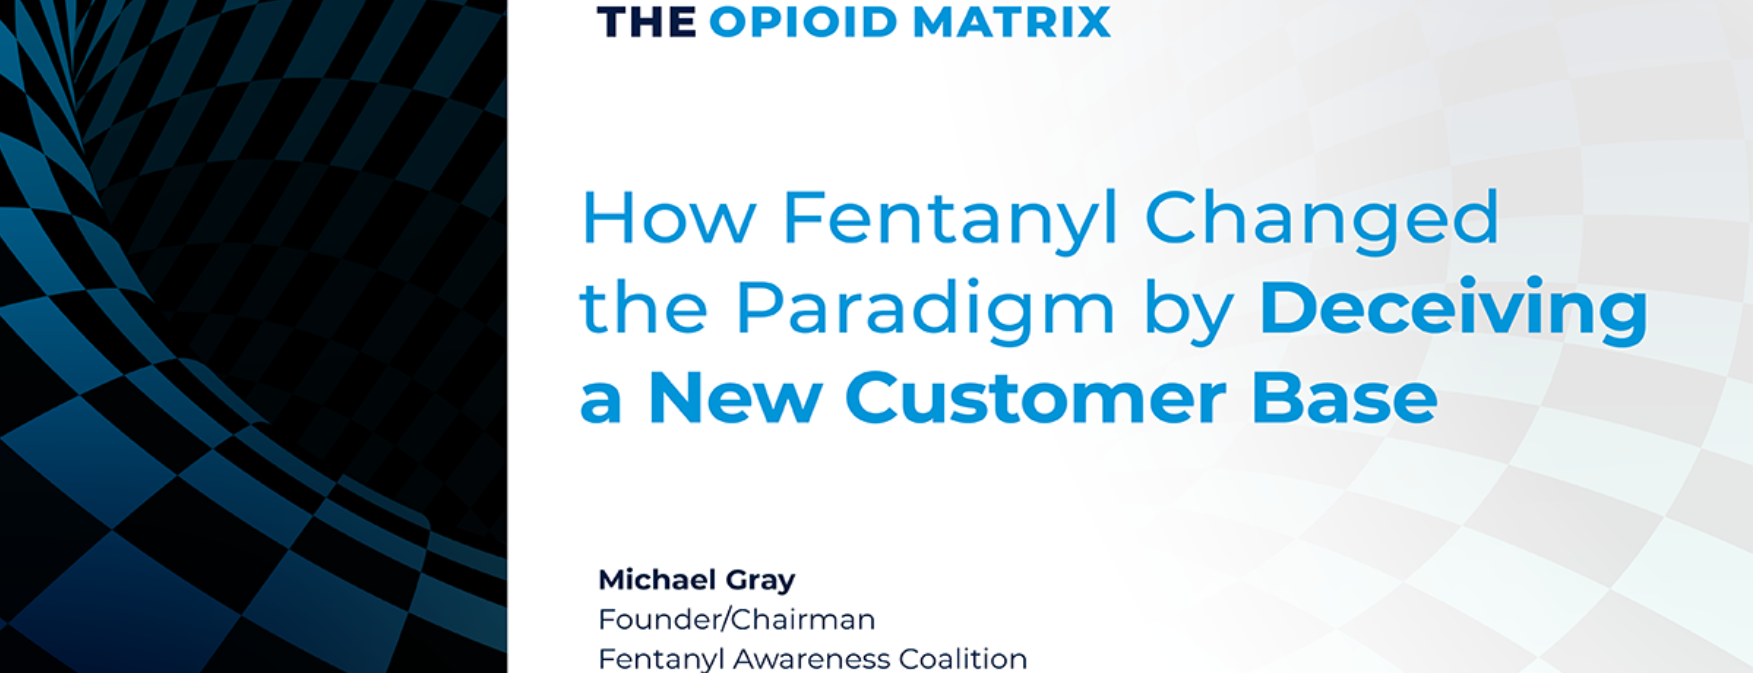 How Fentanyl Changed the Paradigm by Deceiving a New Customer Base